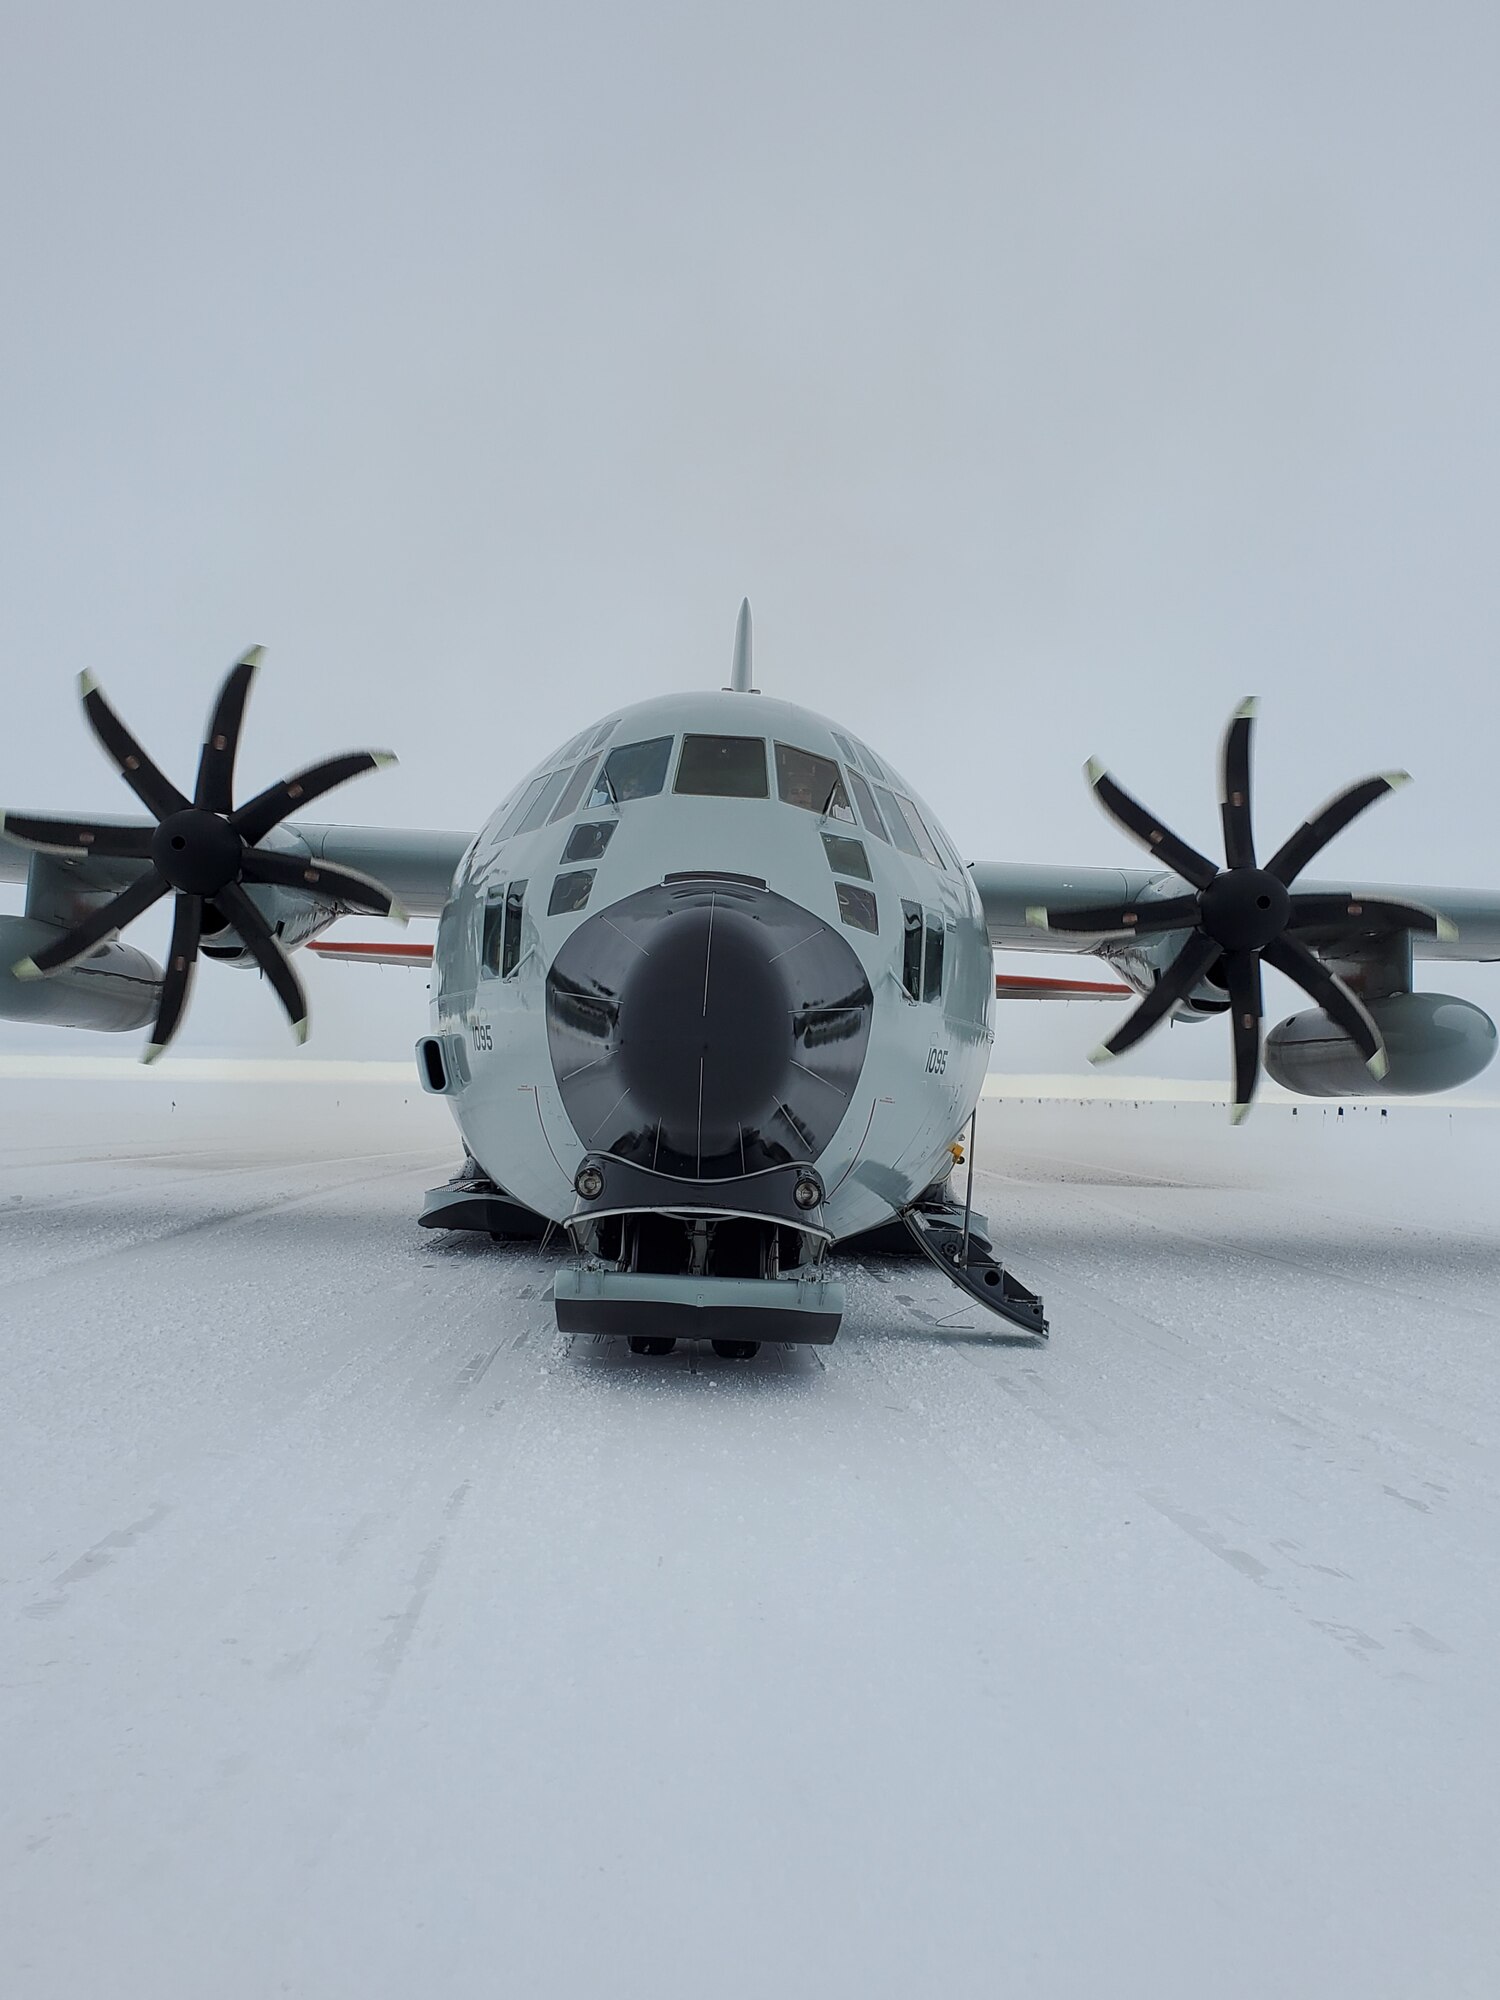 A LC-130 Hercules assigned to the 109th Airlift Wing, New York Air National Guard, sits on an airfield made of snow near the McMurdo Station, Antarctica